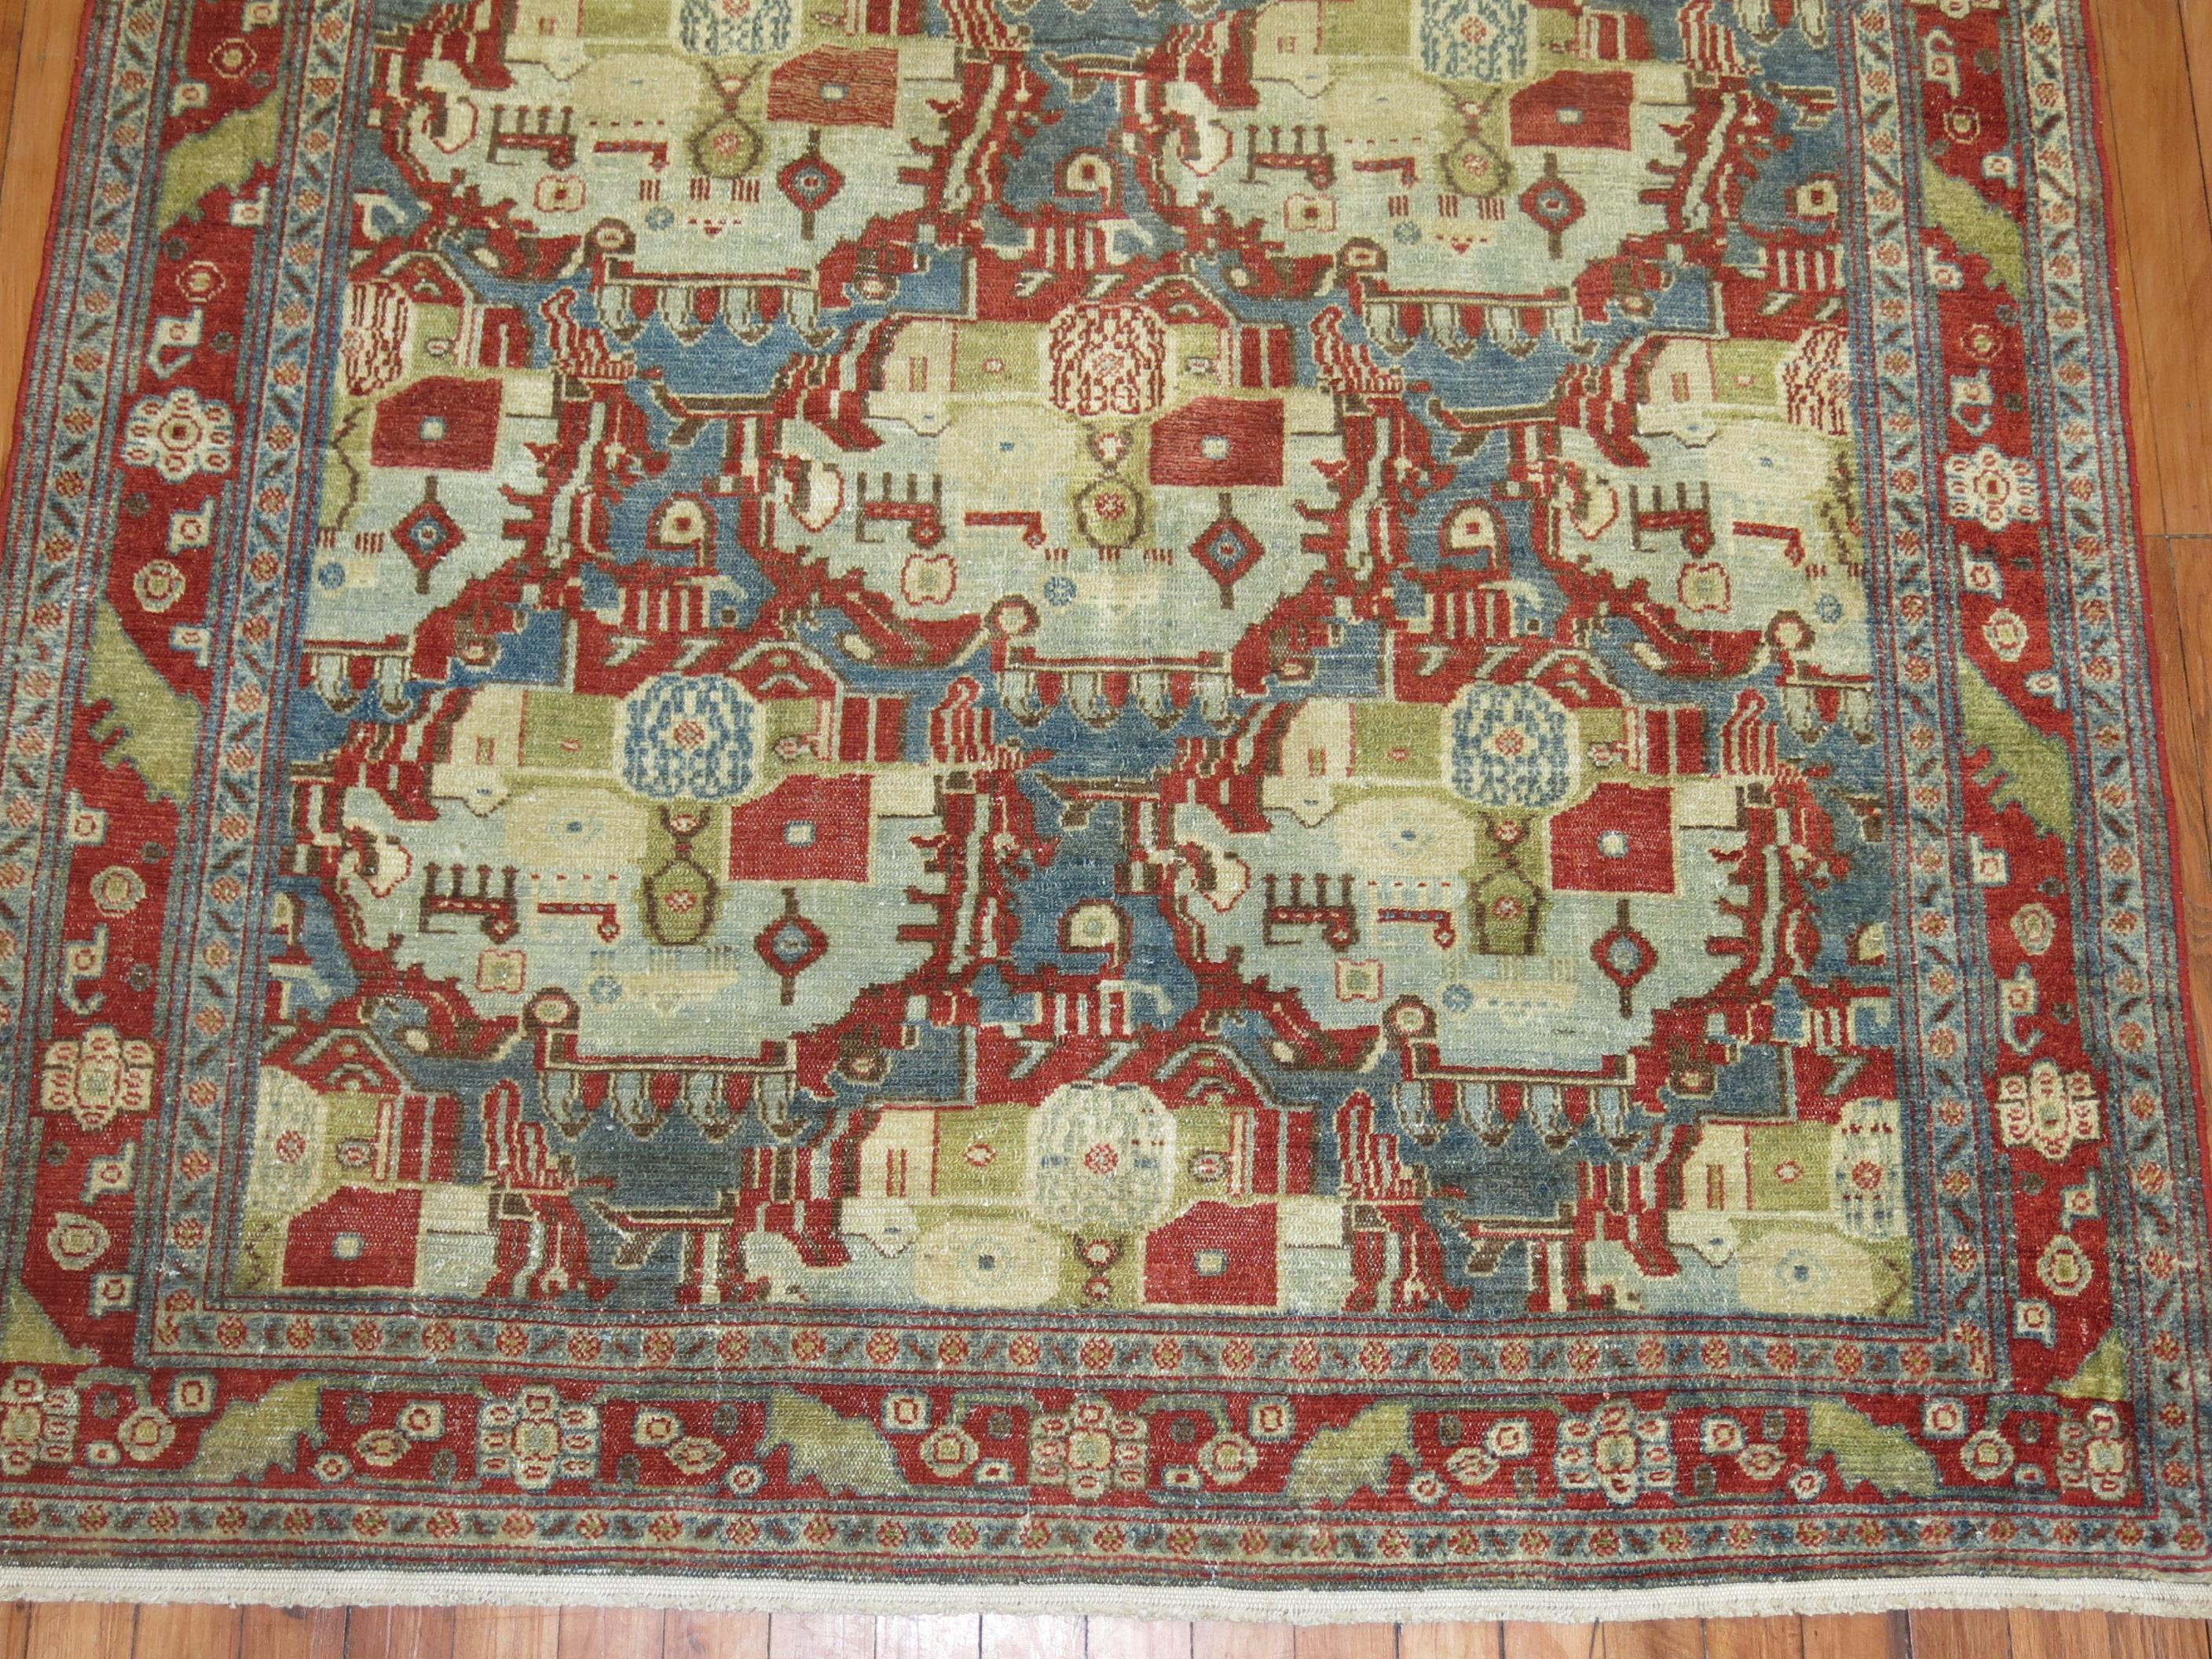 Early 20th century Persian Malayer rug.

The best Malayer carpets were woven in the village of Mishin, and use a lustrous, resilient wool and subtle, mesmerizing, repeating patterns. Many of the weavers were of ethnic Turkish stock and the